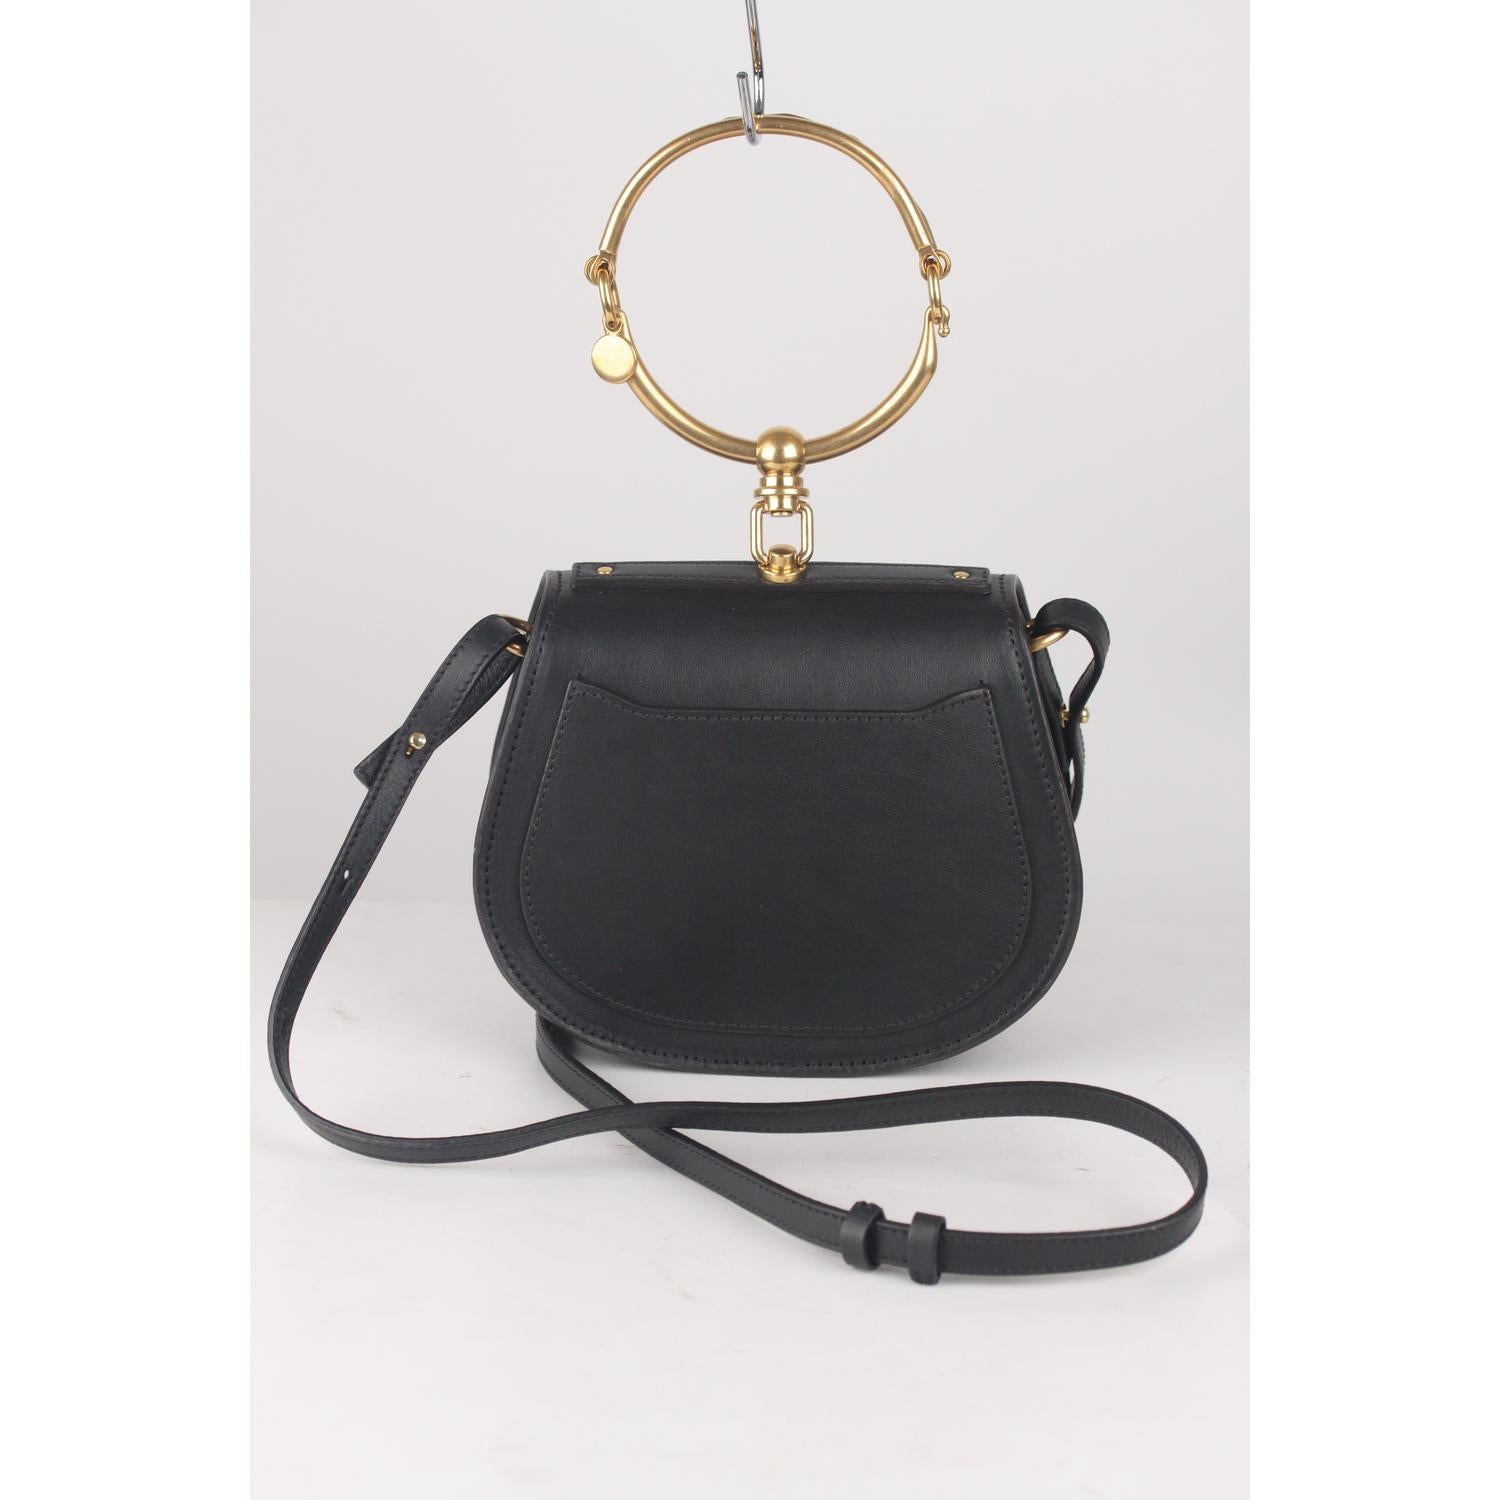 Chloe Black Leather Suede Nile Bracelet Bag with Shoulder Strap In Excellent Condition In Rome, Rome